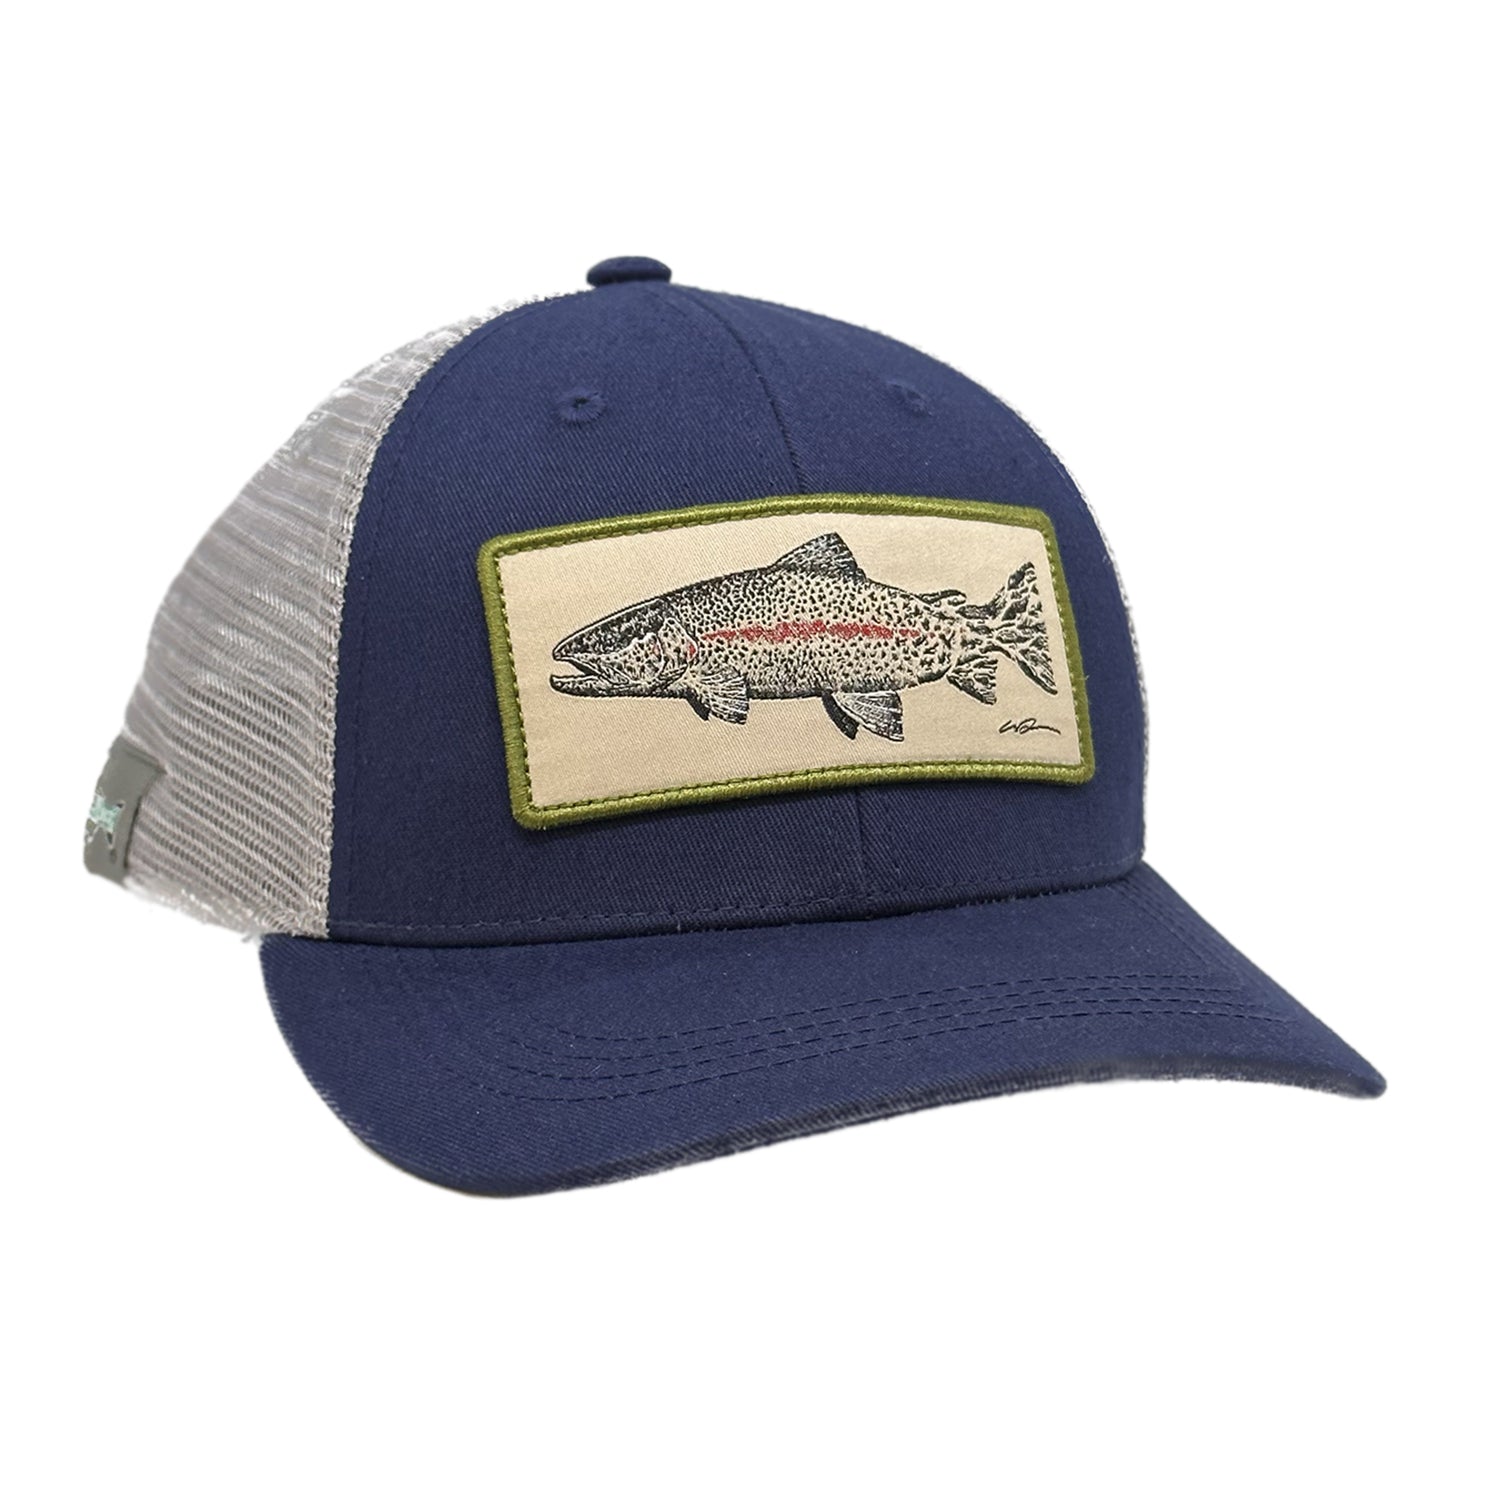 A navy front, light gray mesh back hat with a patch of a pen and ink rainbow trout head changing into flies going towards the tail of the fish